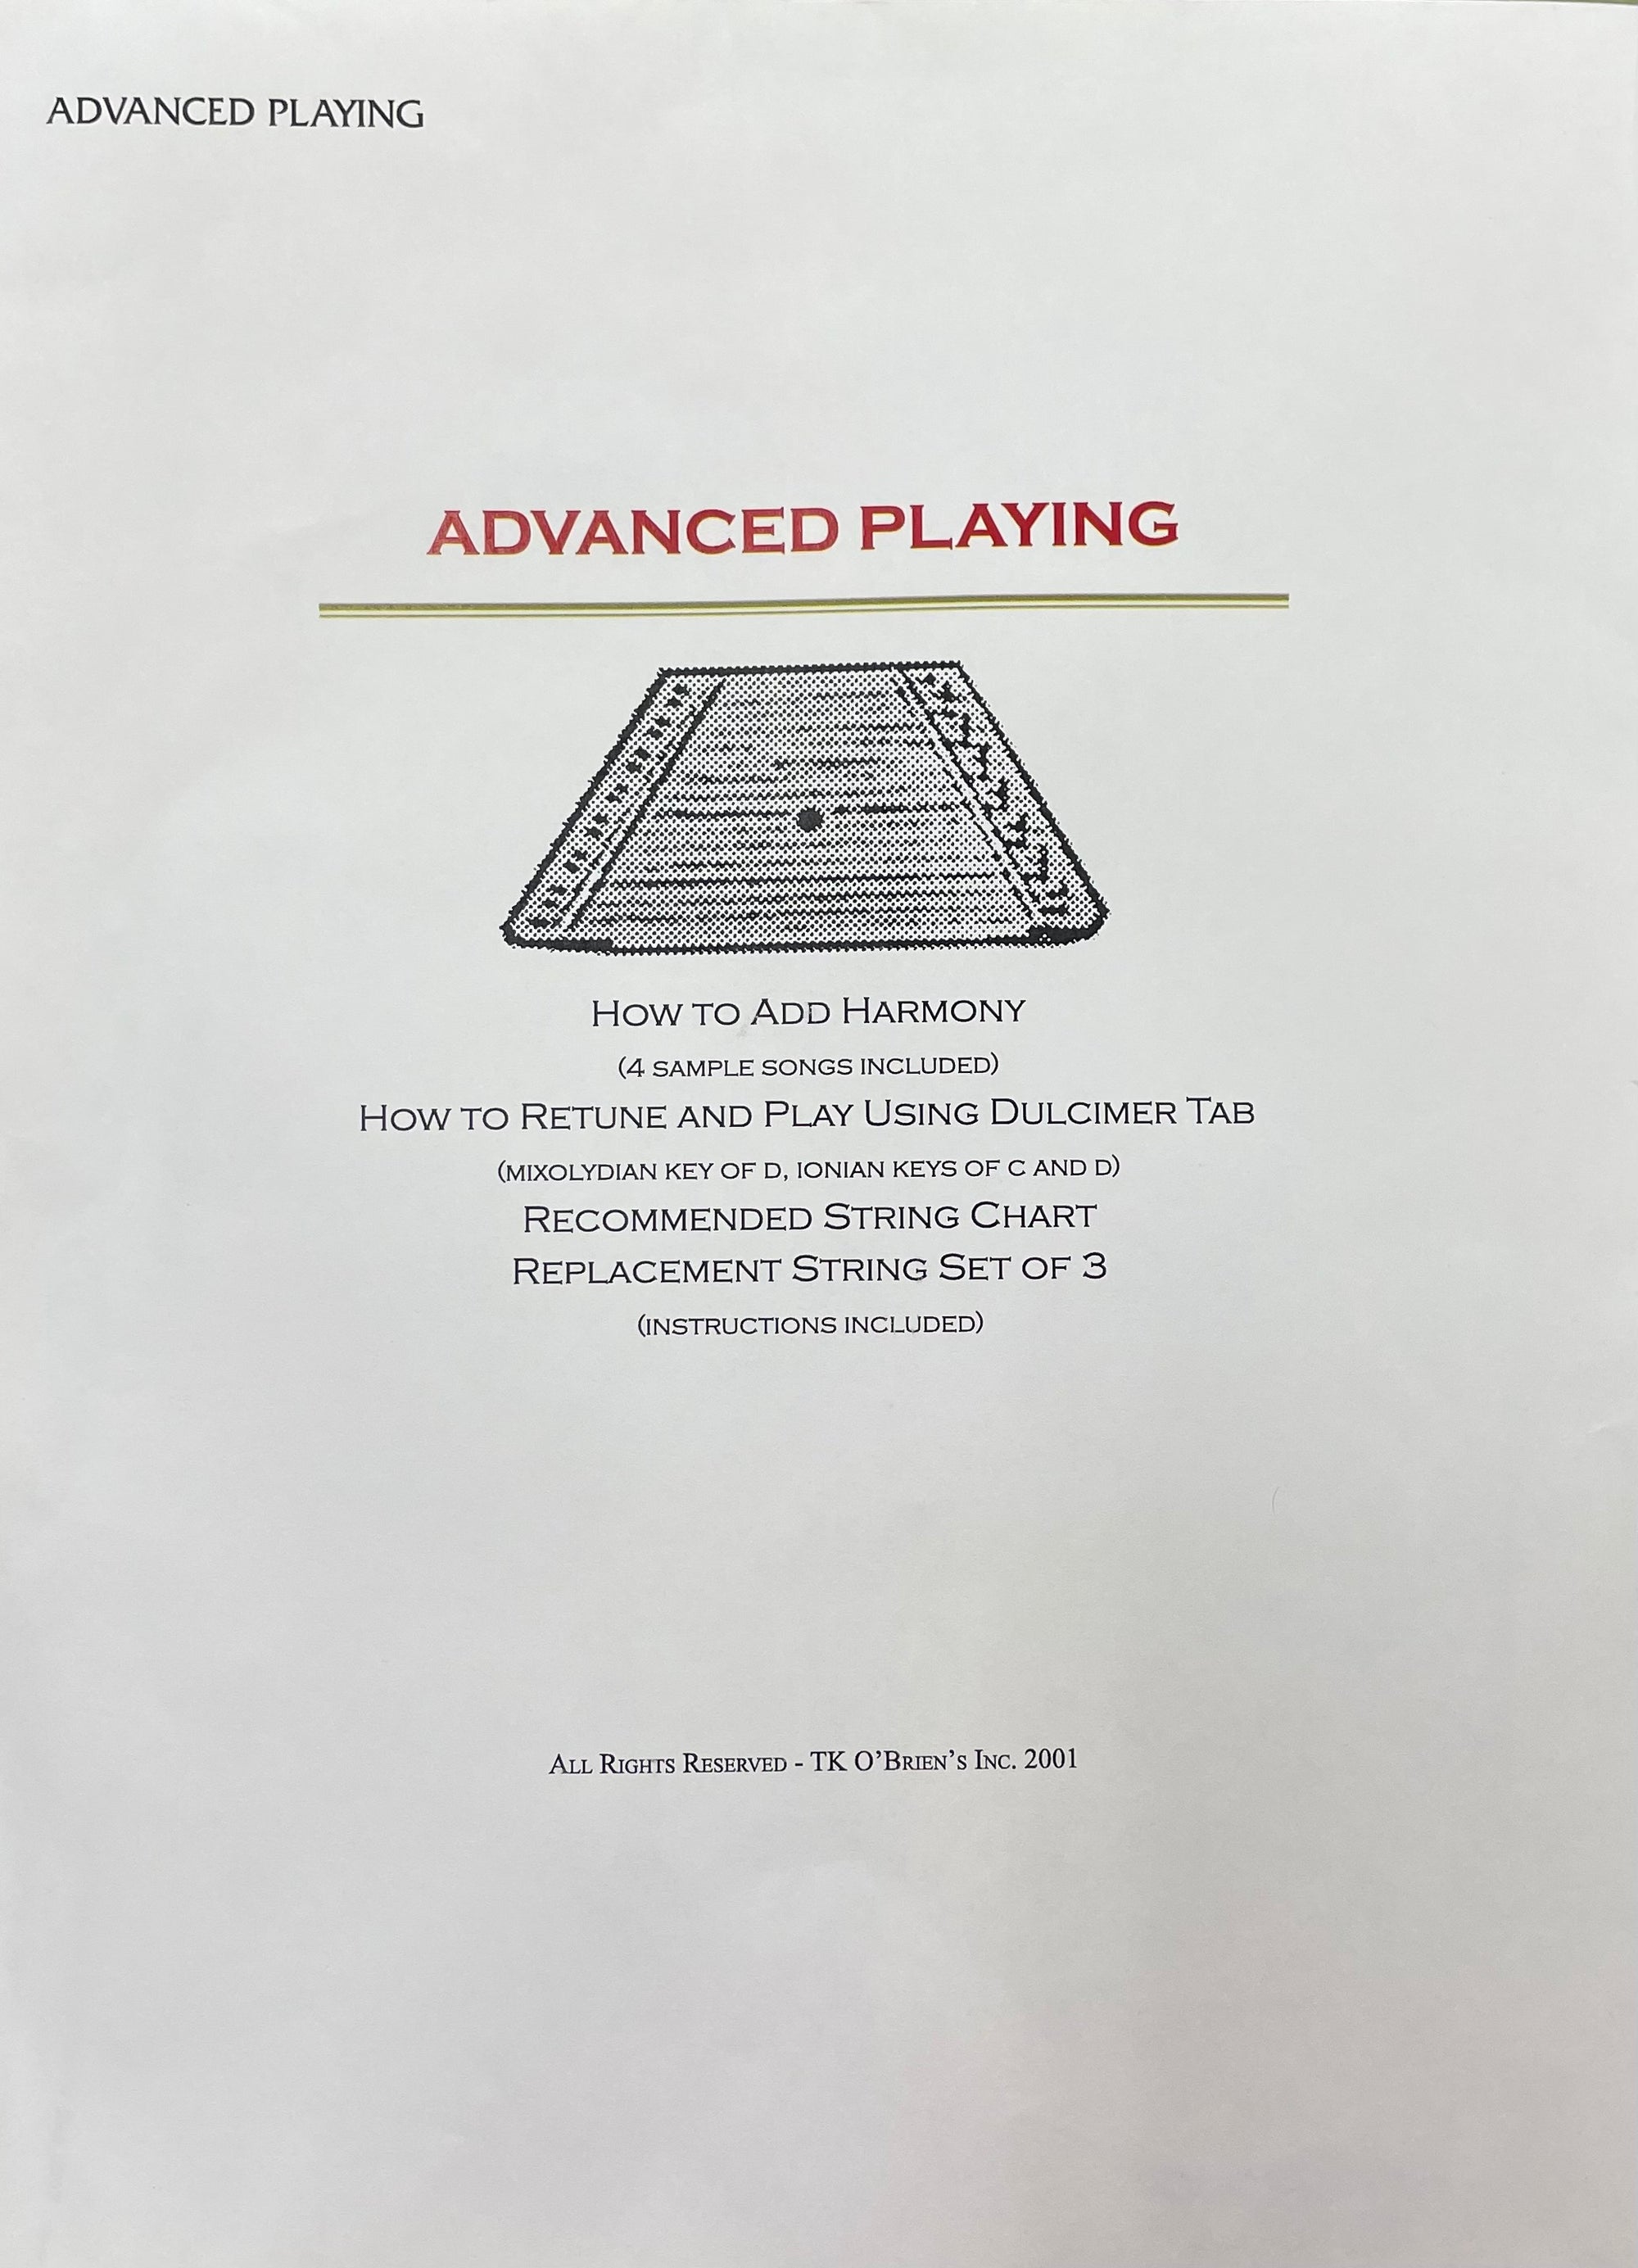 Cover page of a music book titled "Advanced Playing Lap Harp Packet," outlining sections on harmony, retuning, dulcimer tab, replacement string charts, and instructions. Published by TK O'Brien's Inc. in 2001.